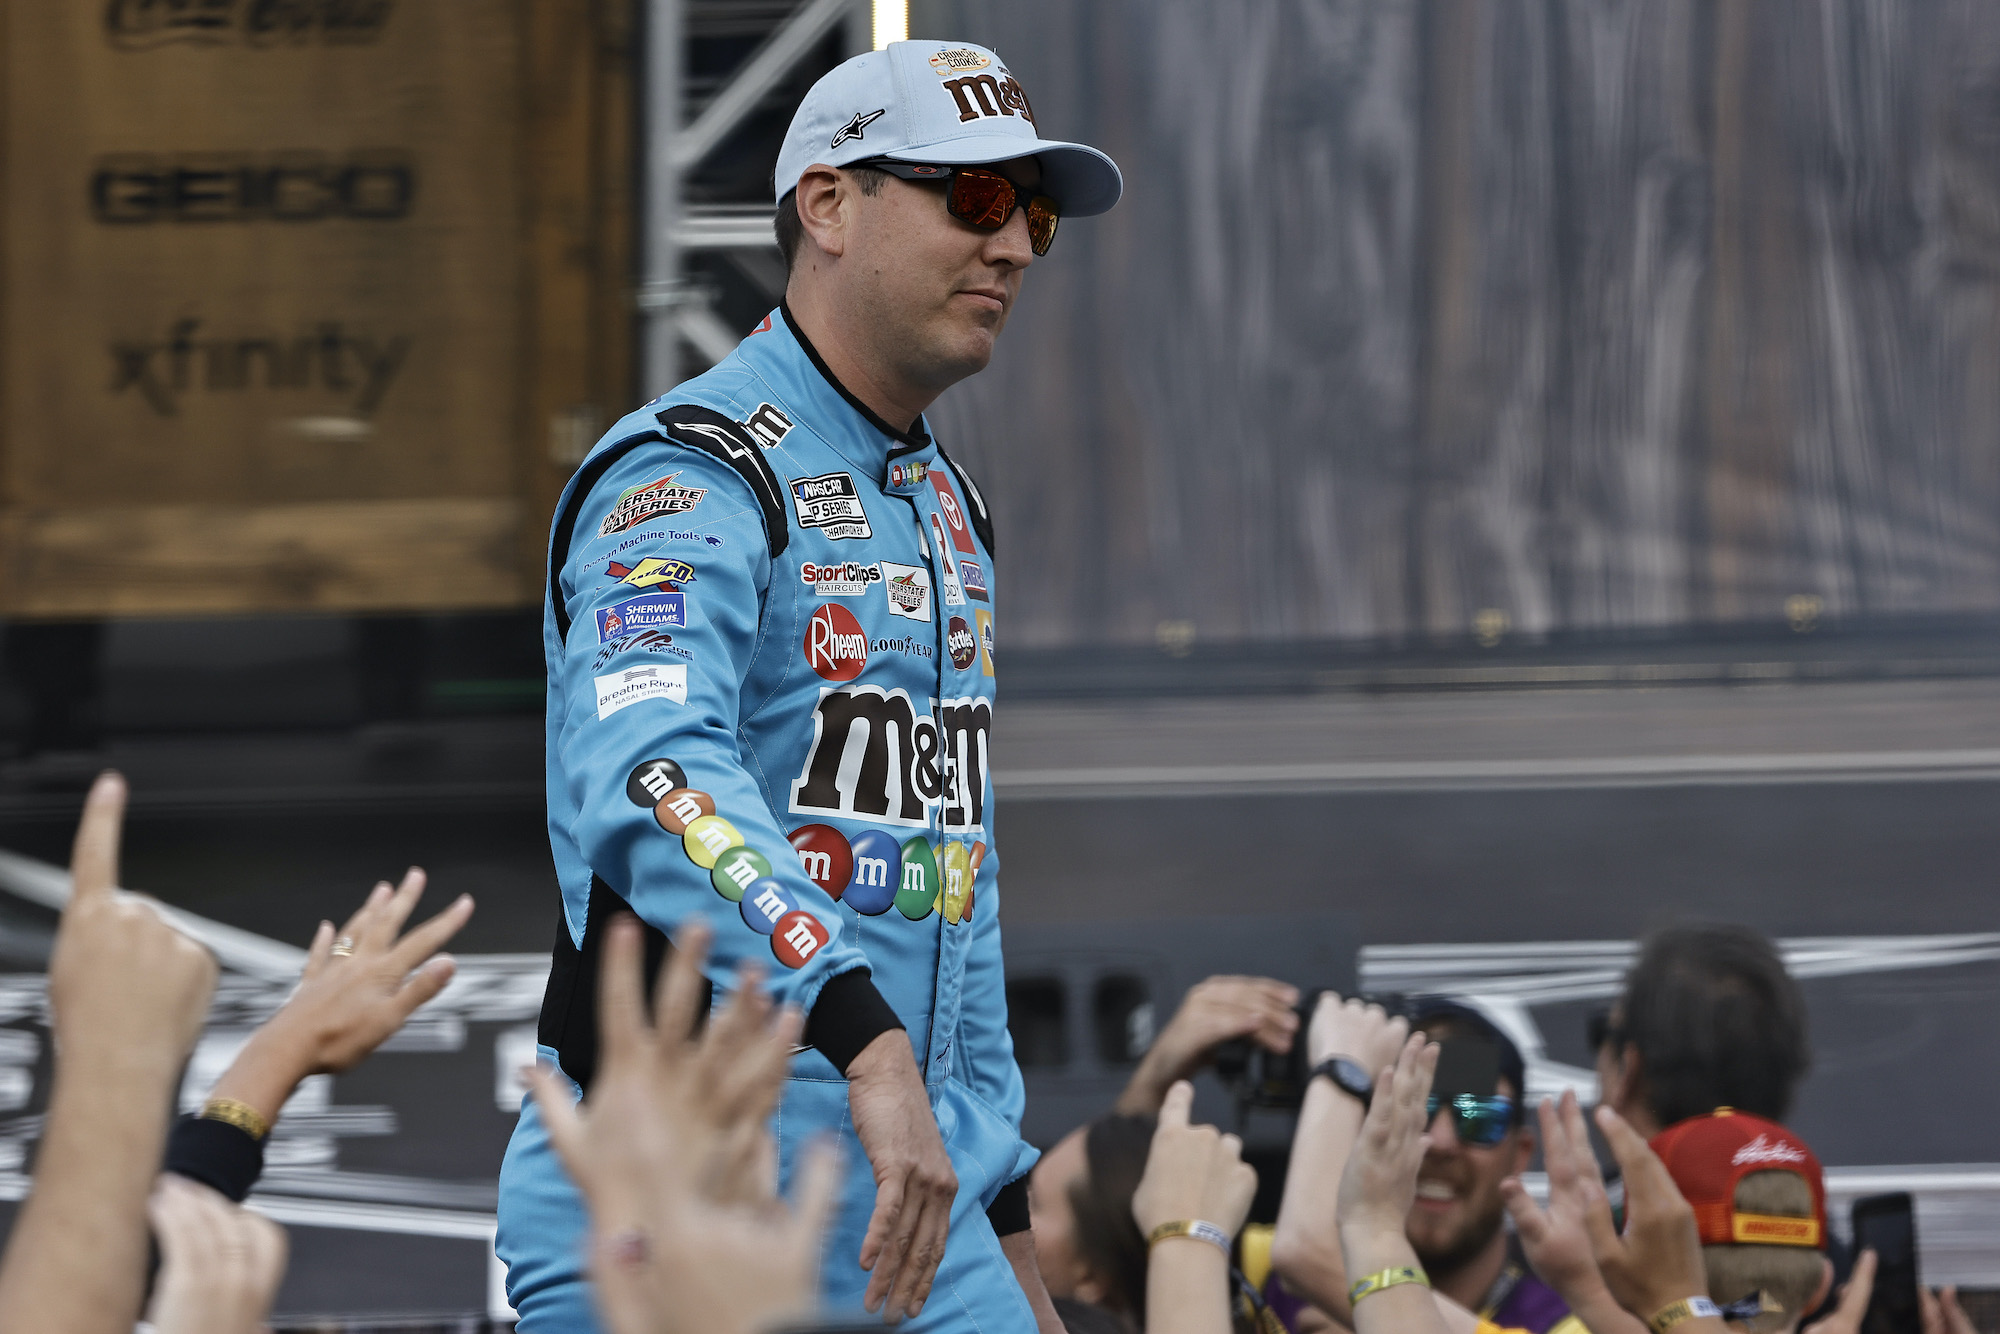 Kyle Busch walks onstage during driver intros prior to the NASCAR Cup Series All-Star Race at Texas Motor Speedway on May 22, 2022. | Buda Mendes/Getty Images